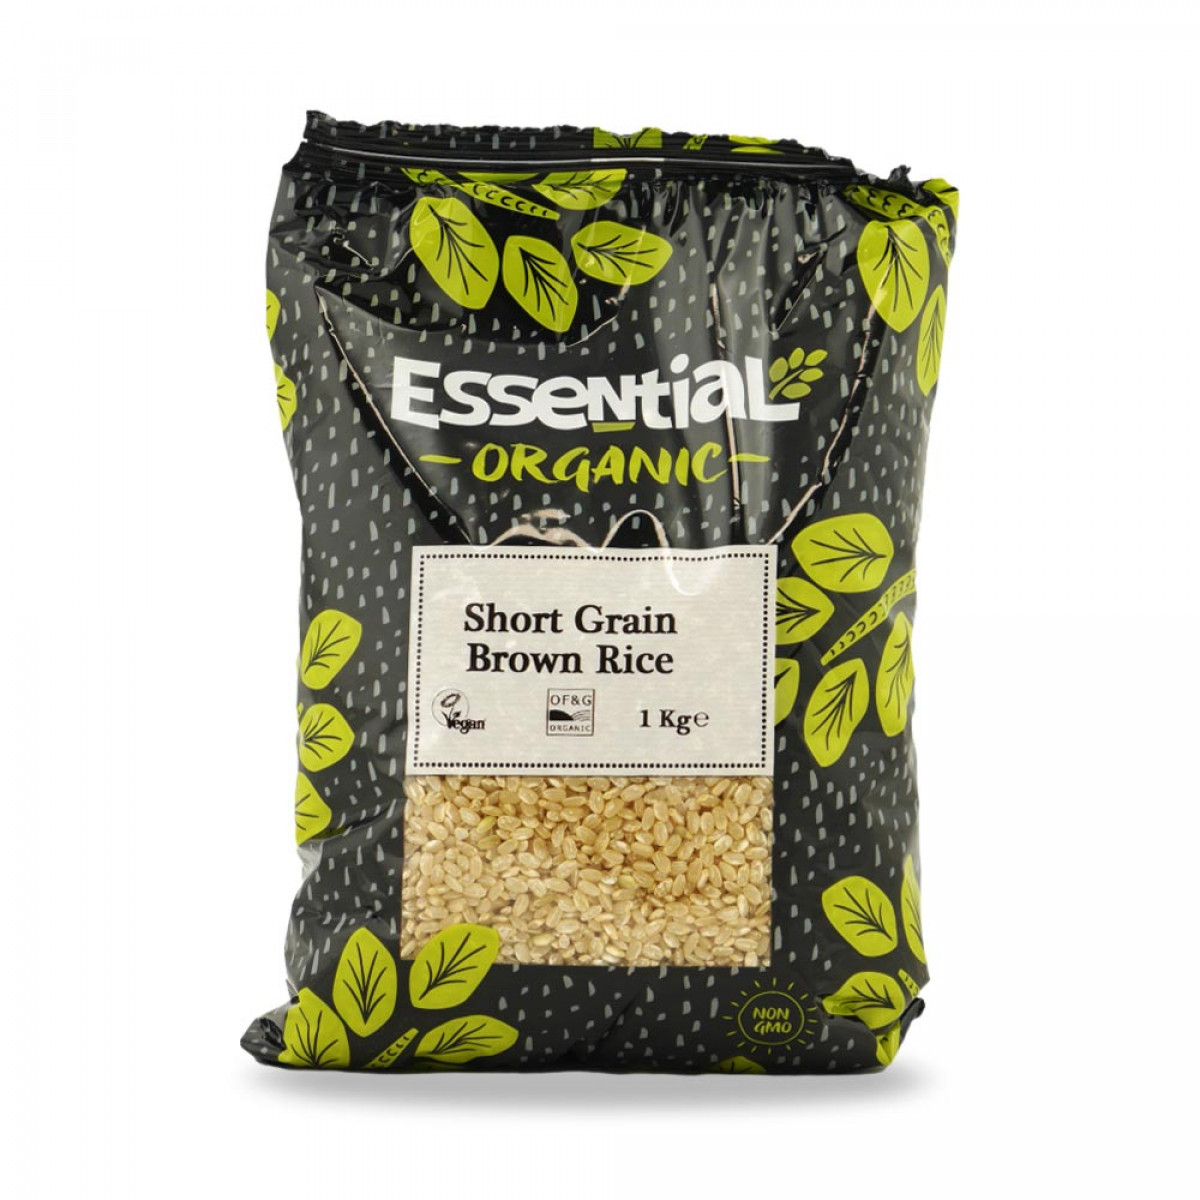 Product picture for Short Grain Brown Rice